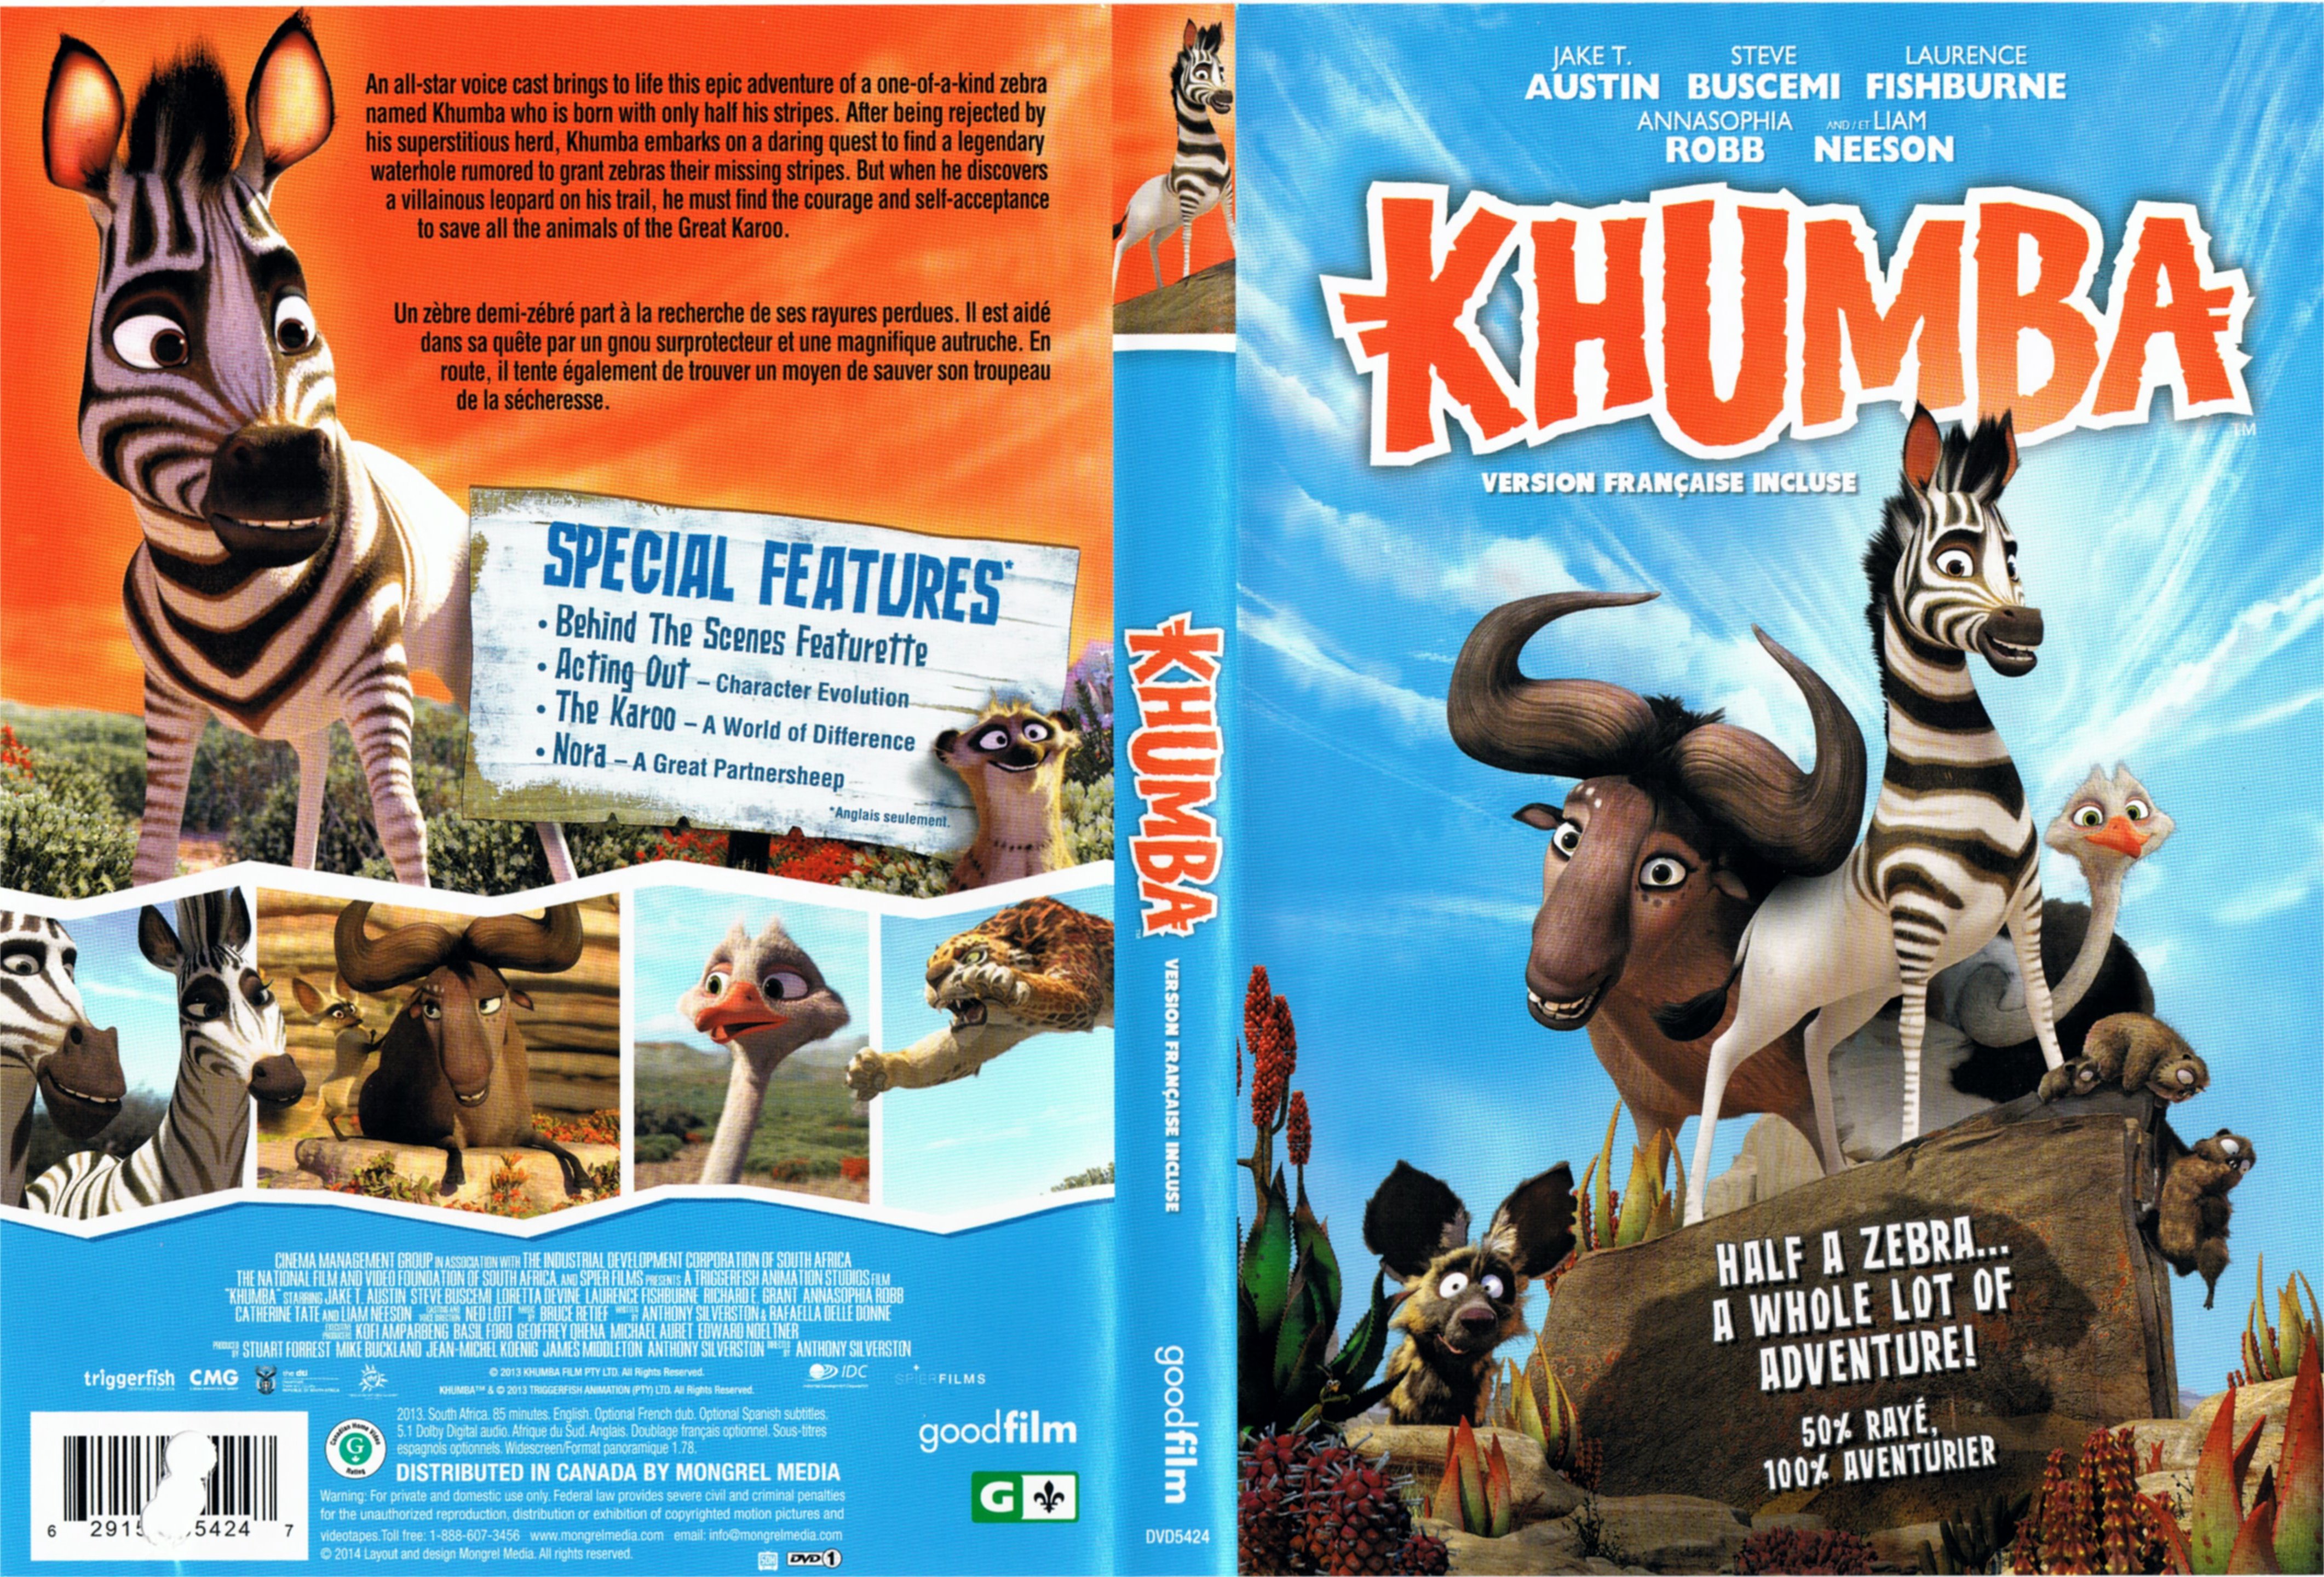 Jaquette DVD Khumba (Canadienne)